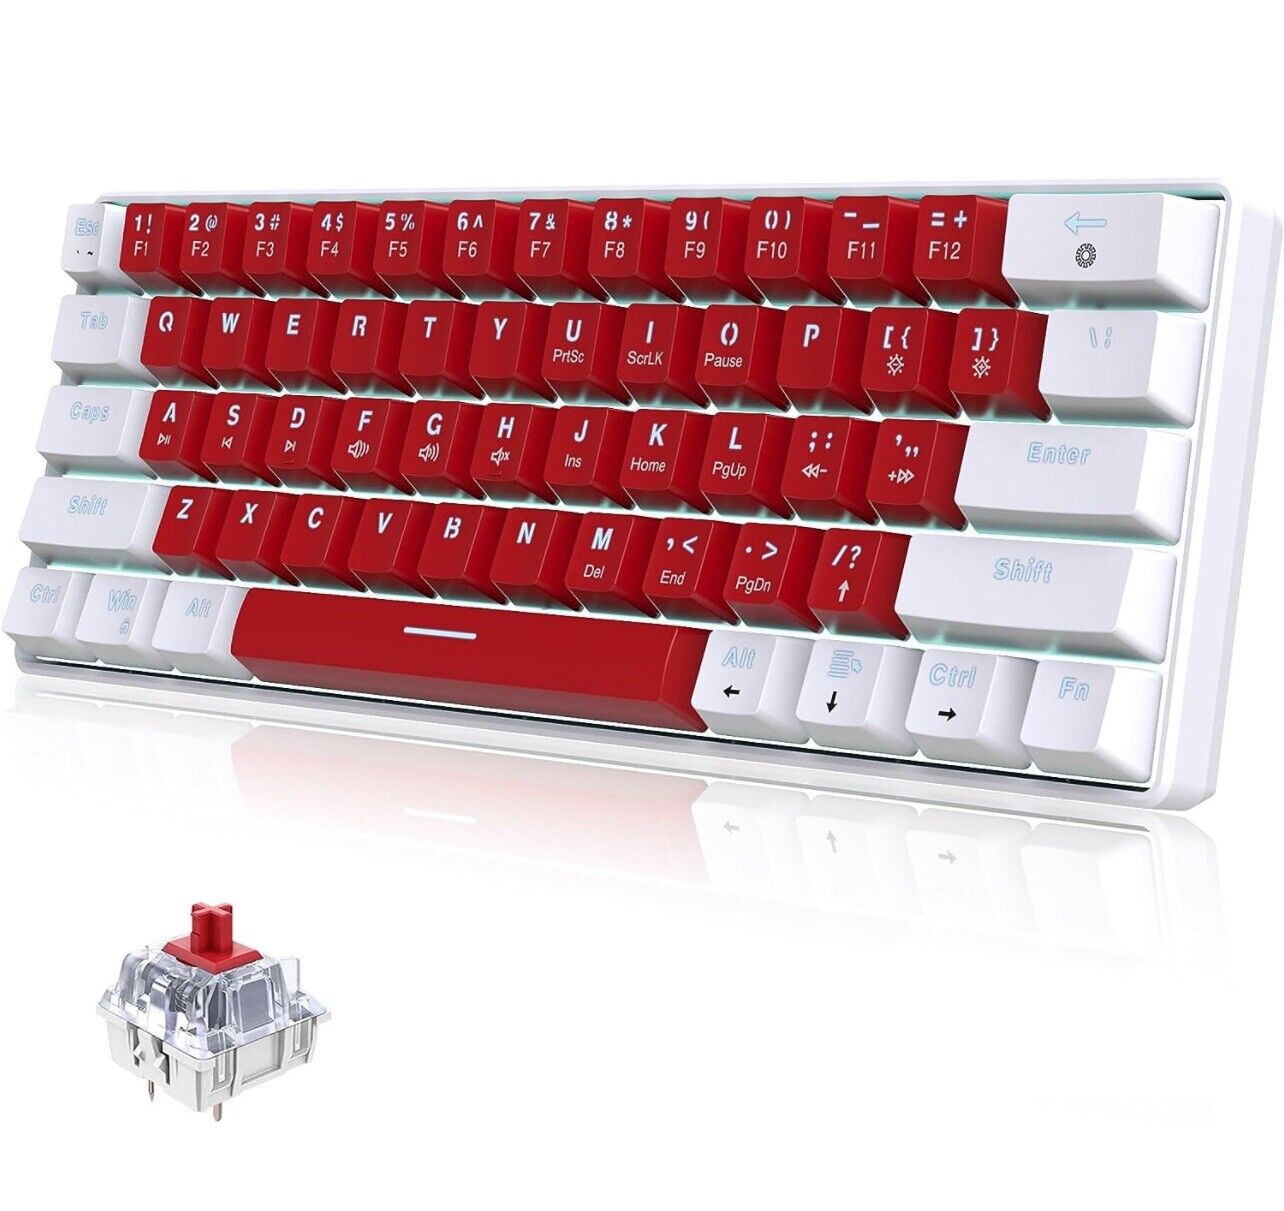 Wired 60% Mechanical Gaming Keyboard, White LED Backlit Ultra-Compact Mini Offic